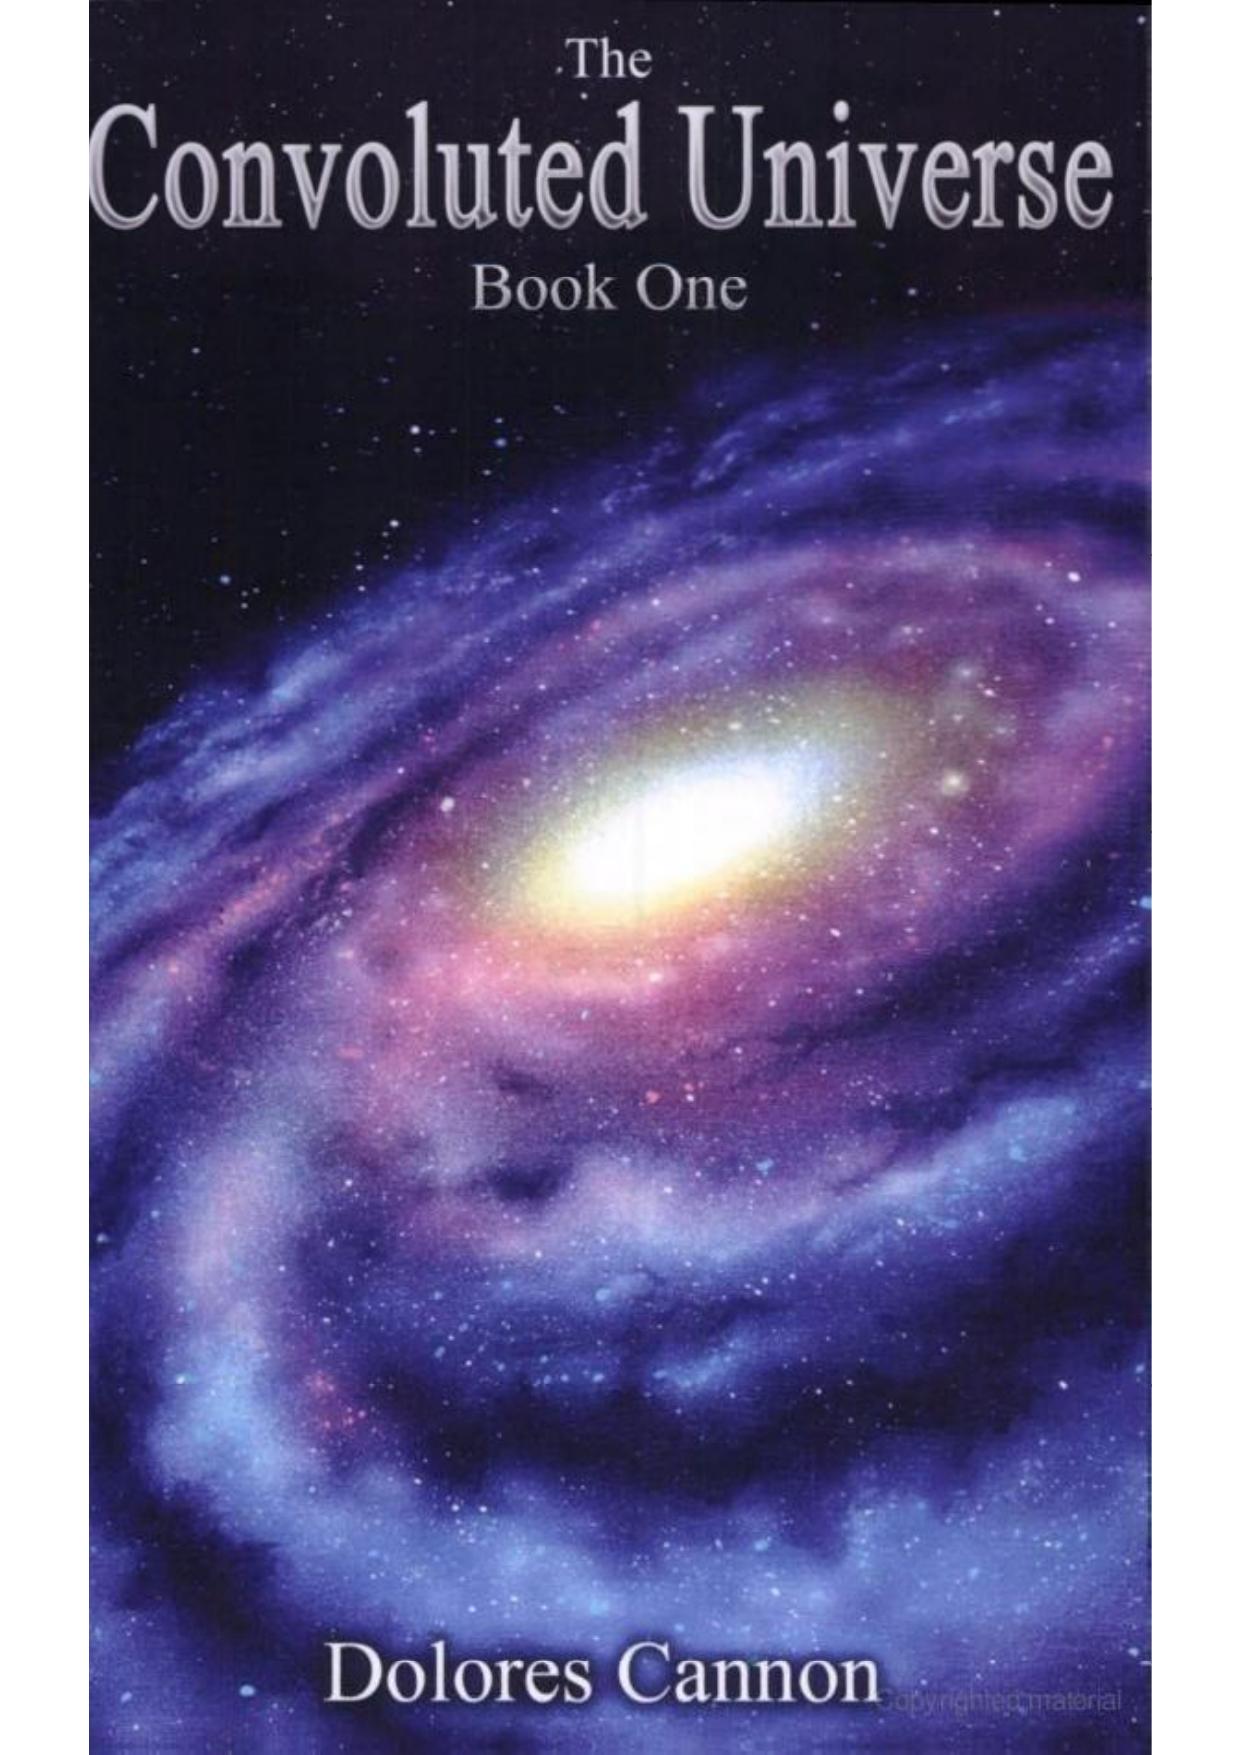 The Convoluted Universe: Book One by Dolores Cannon